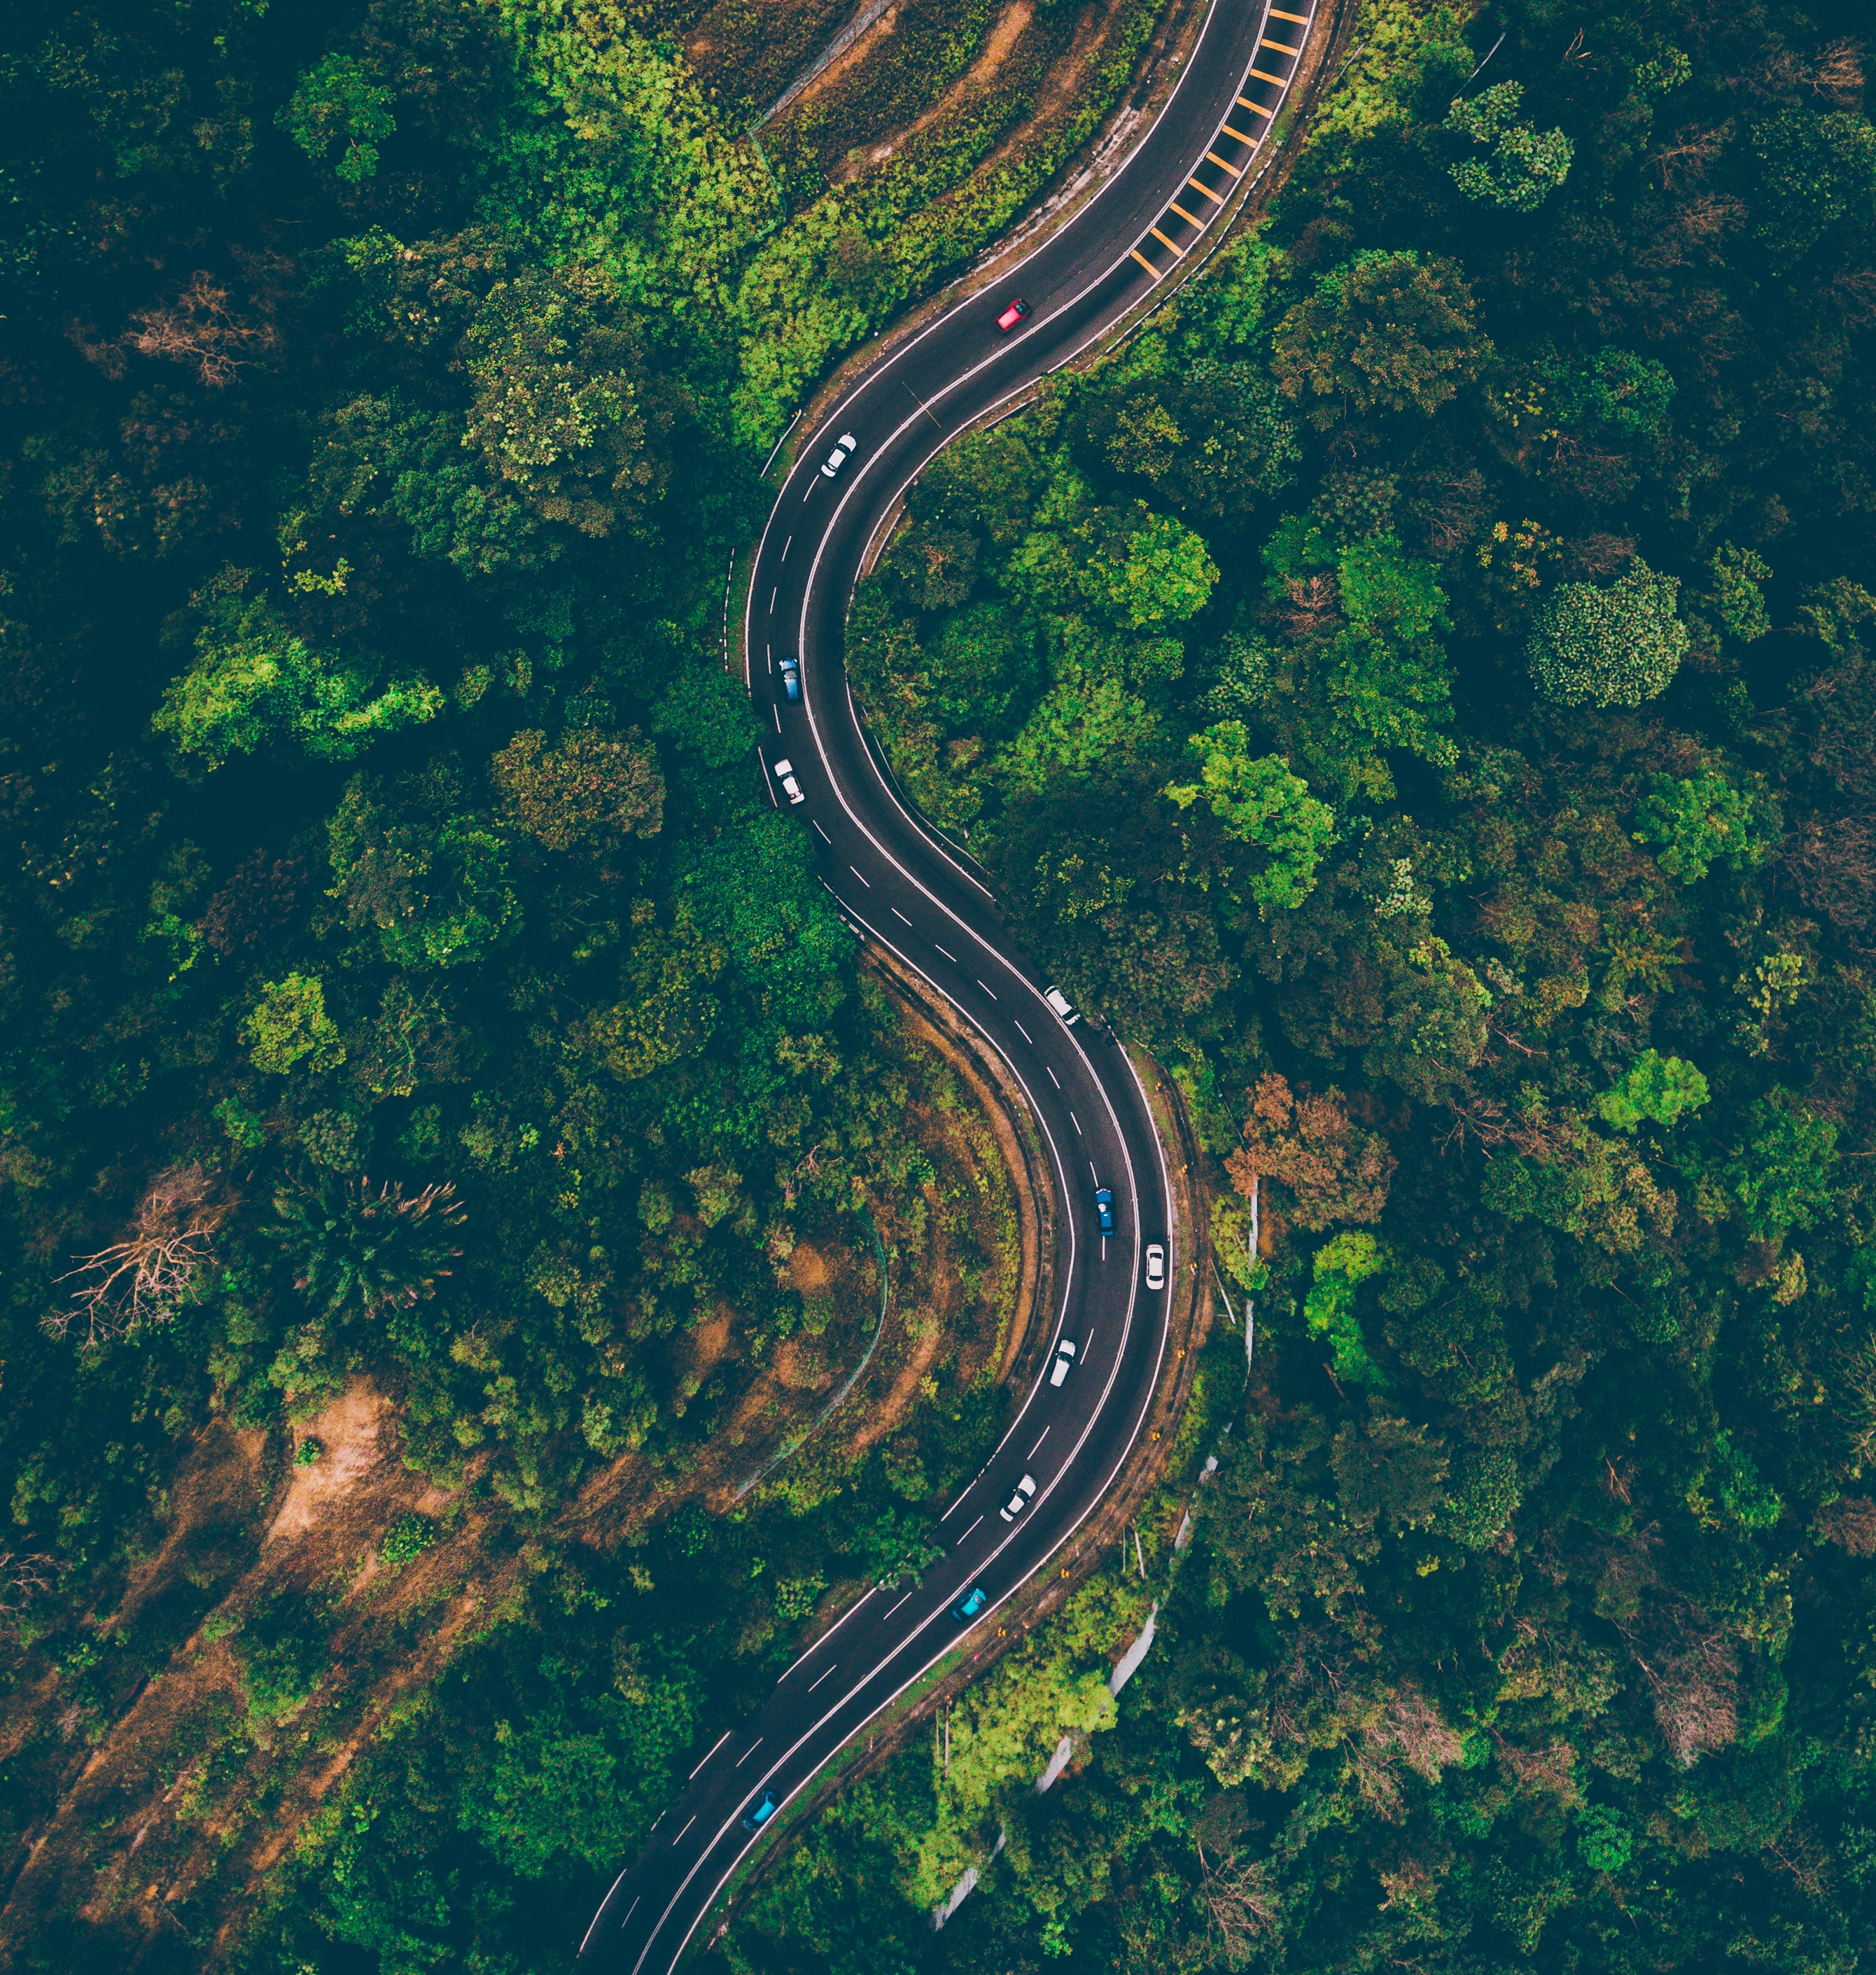 road, sinuous, malaysia, view from above, nature, trees, winding, batang kali